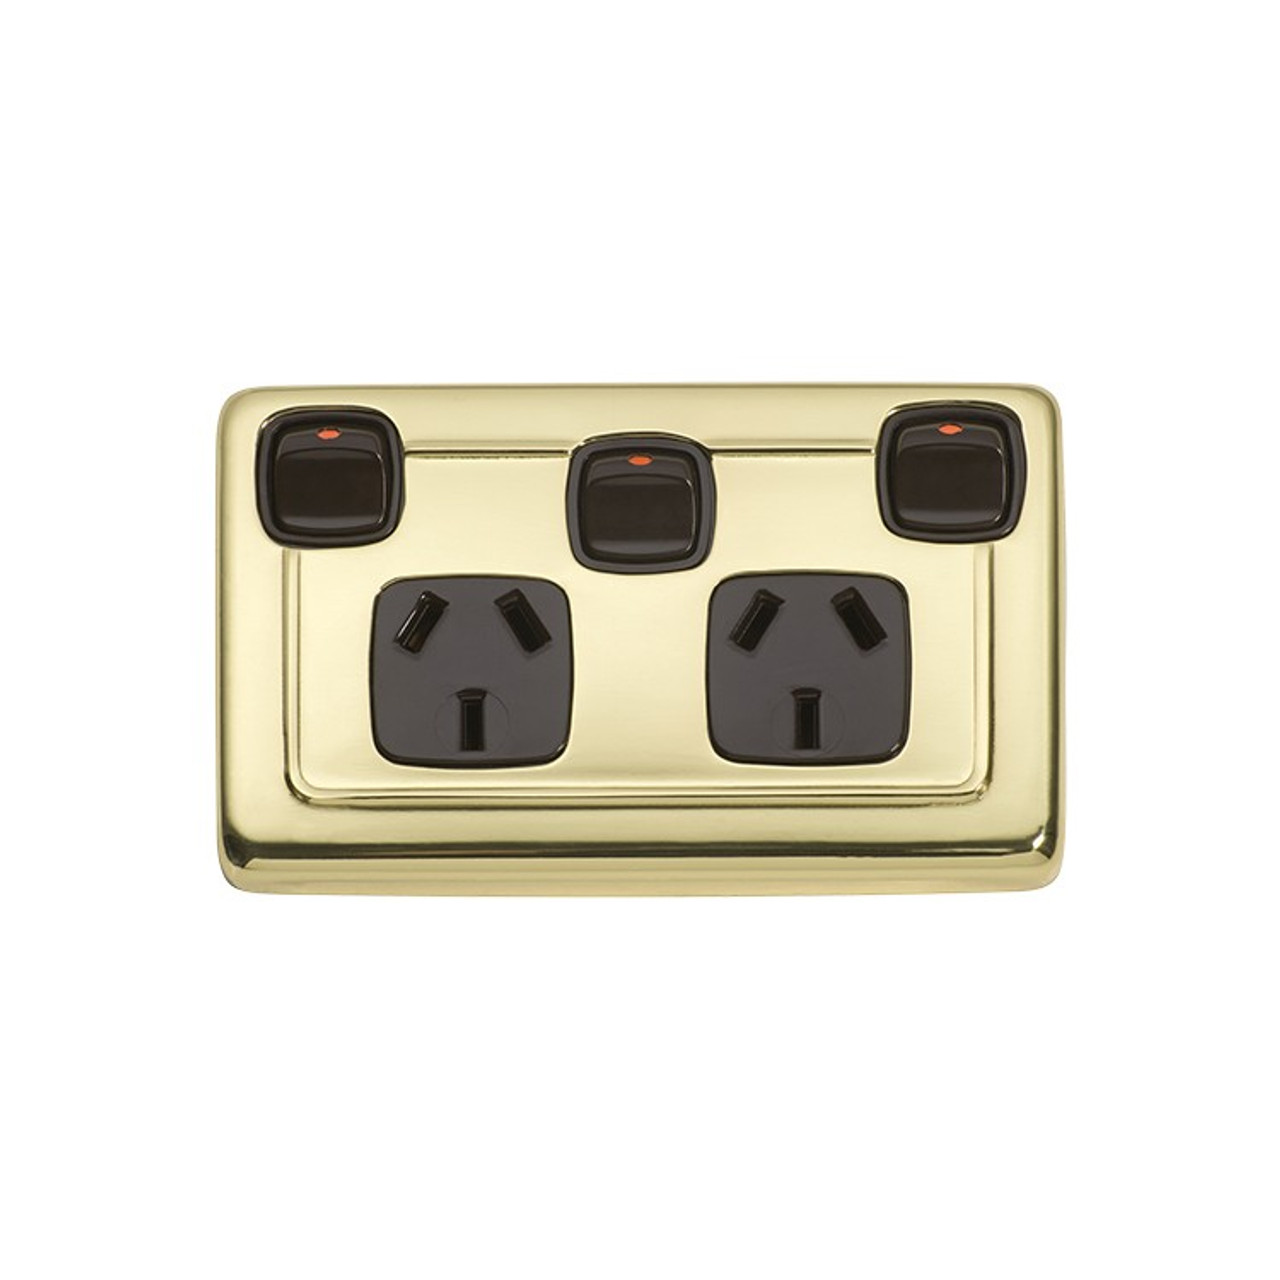 Classic Double GPO Flat Plate Heritage Power Point with Switch - Polished Brass with Brown Inserts 5807